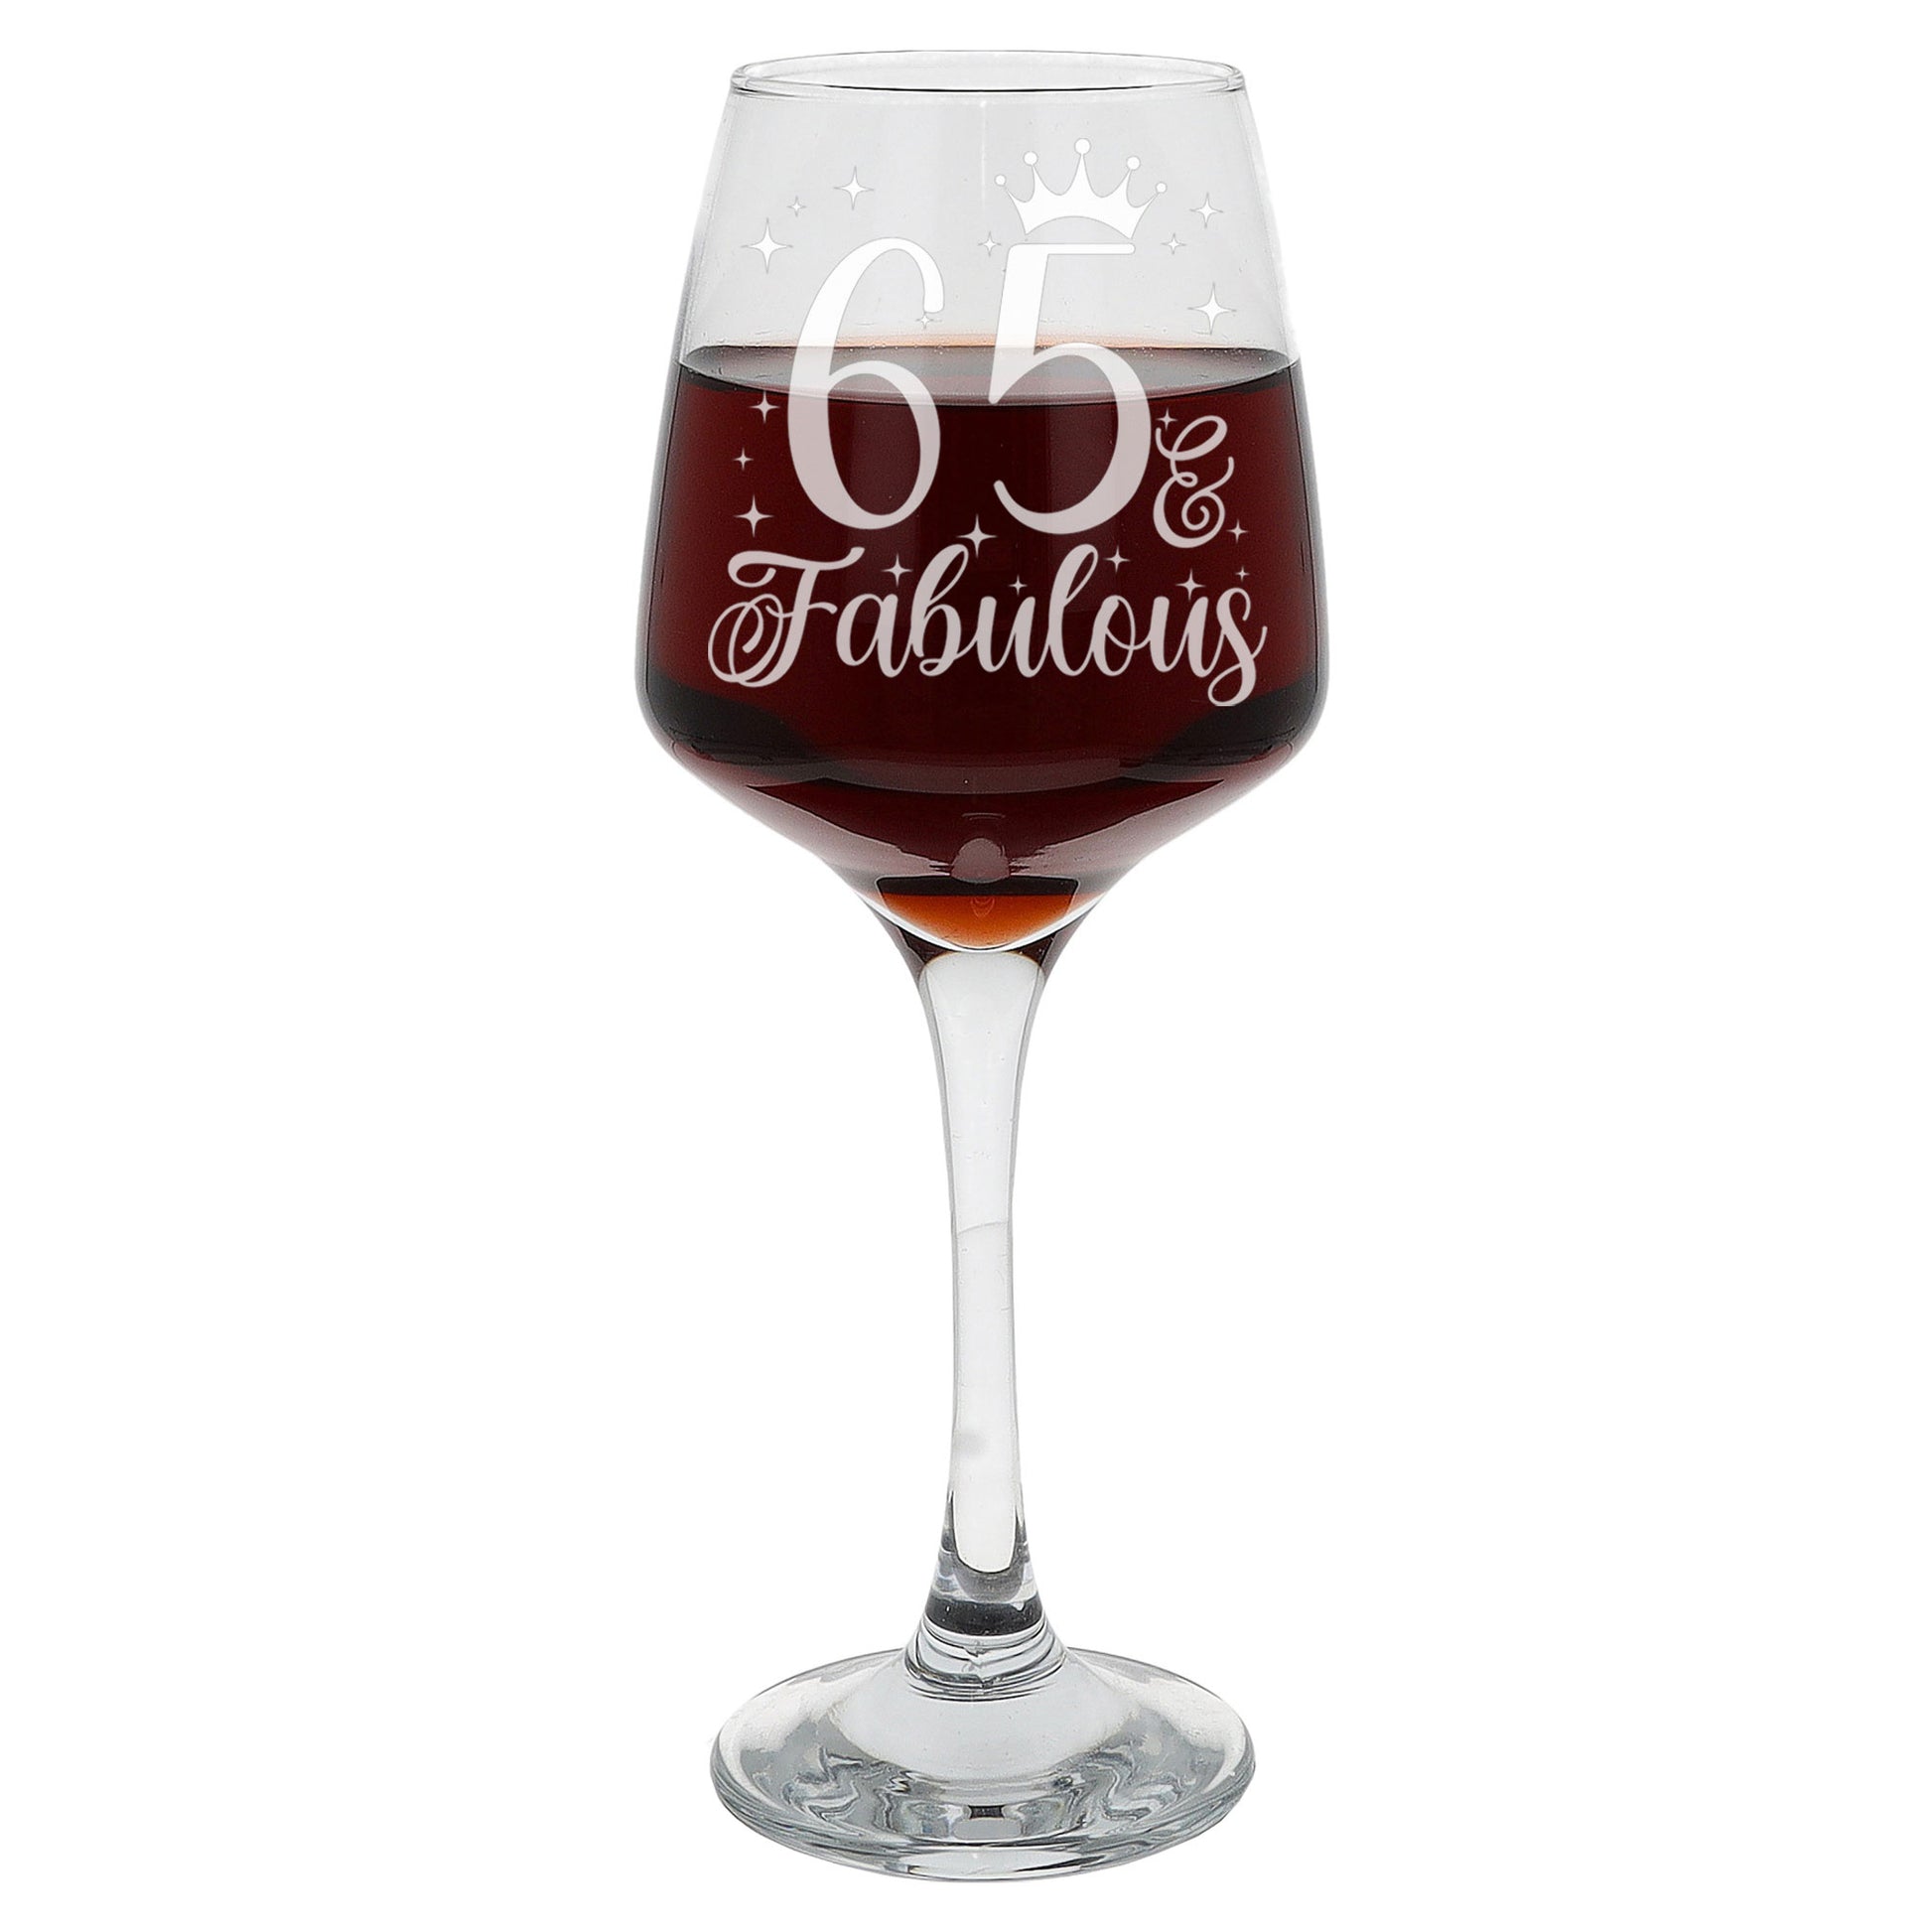 65 & Fabulous 65th Birthday Gift Engraved Wine Glass and/or Coaster Set  - Always Looking Good -   